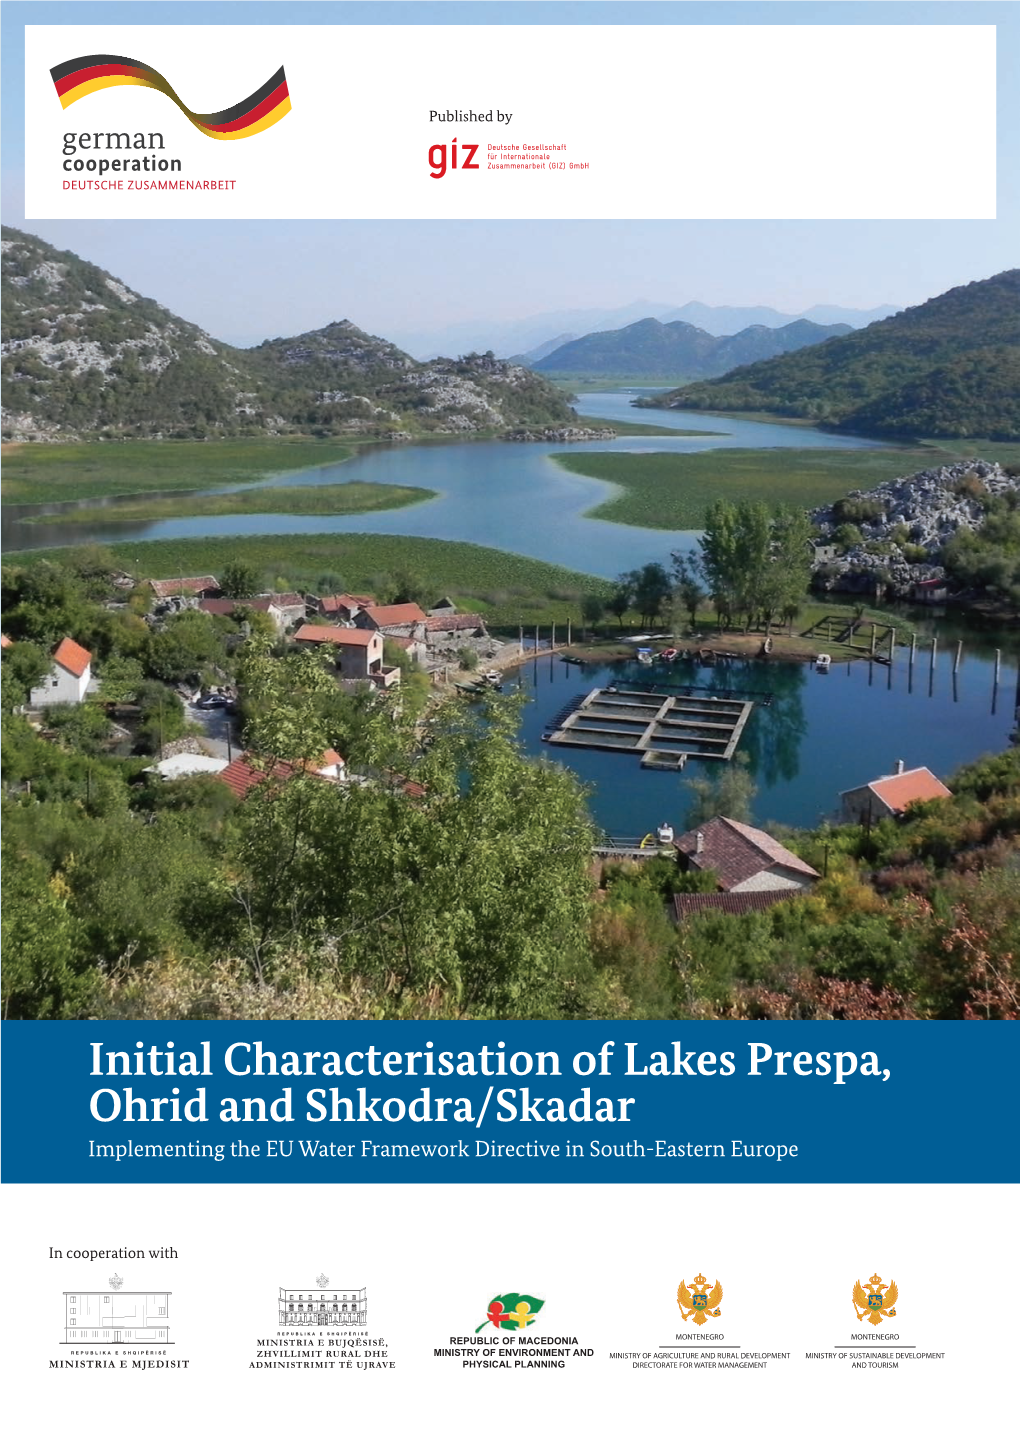 Initial Characterisation of Lakes Prespa, Ohrid and Shkodra/Skadar Implementing the EU Water Framework Directive in South-Eastern Europe